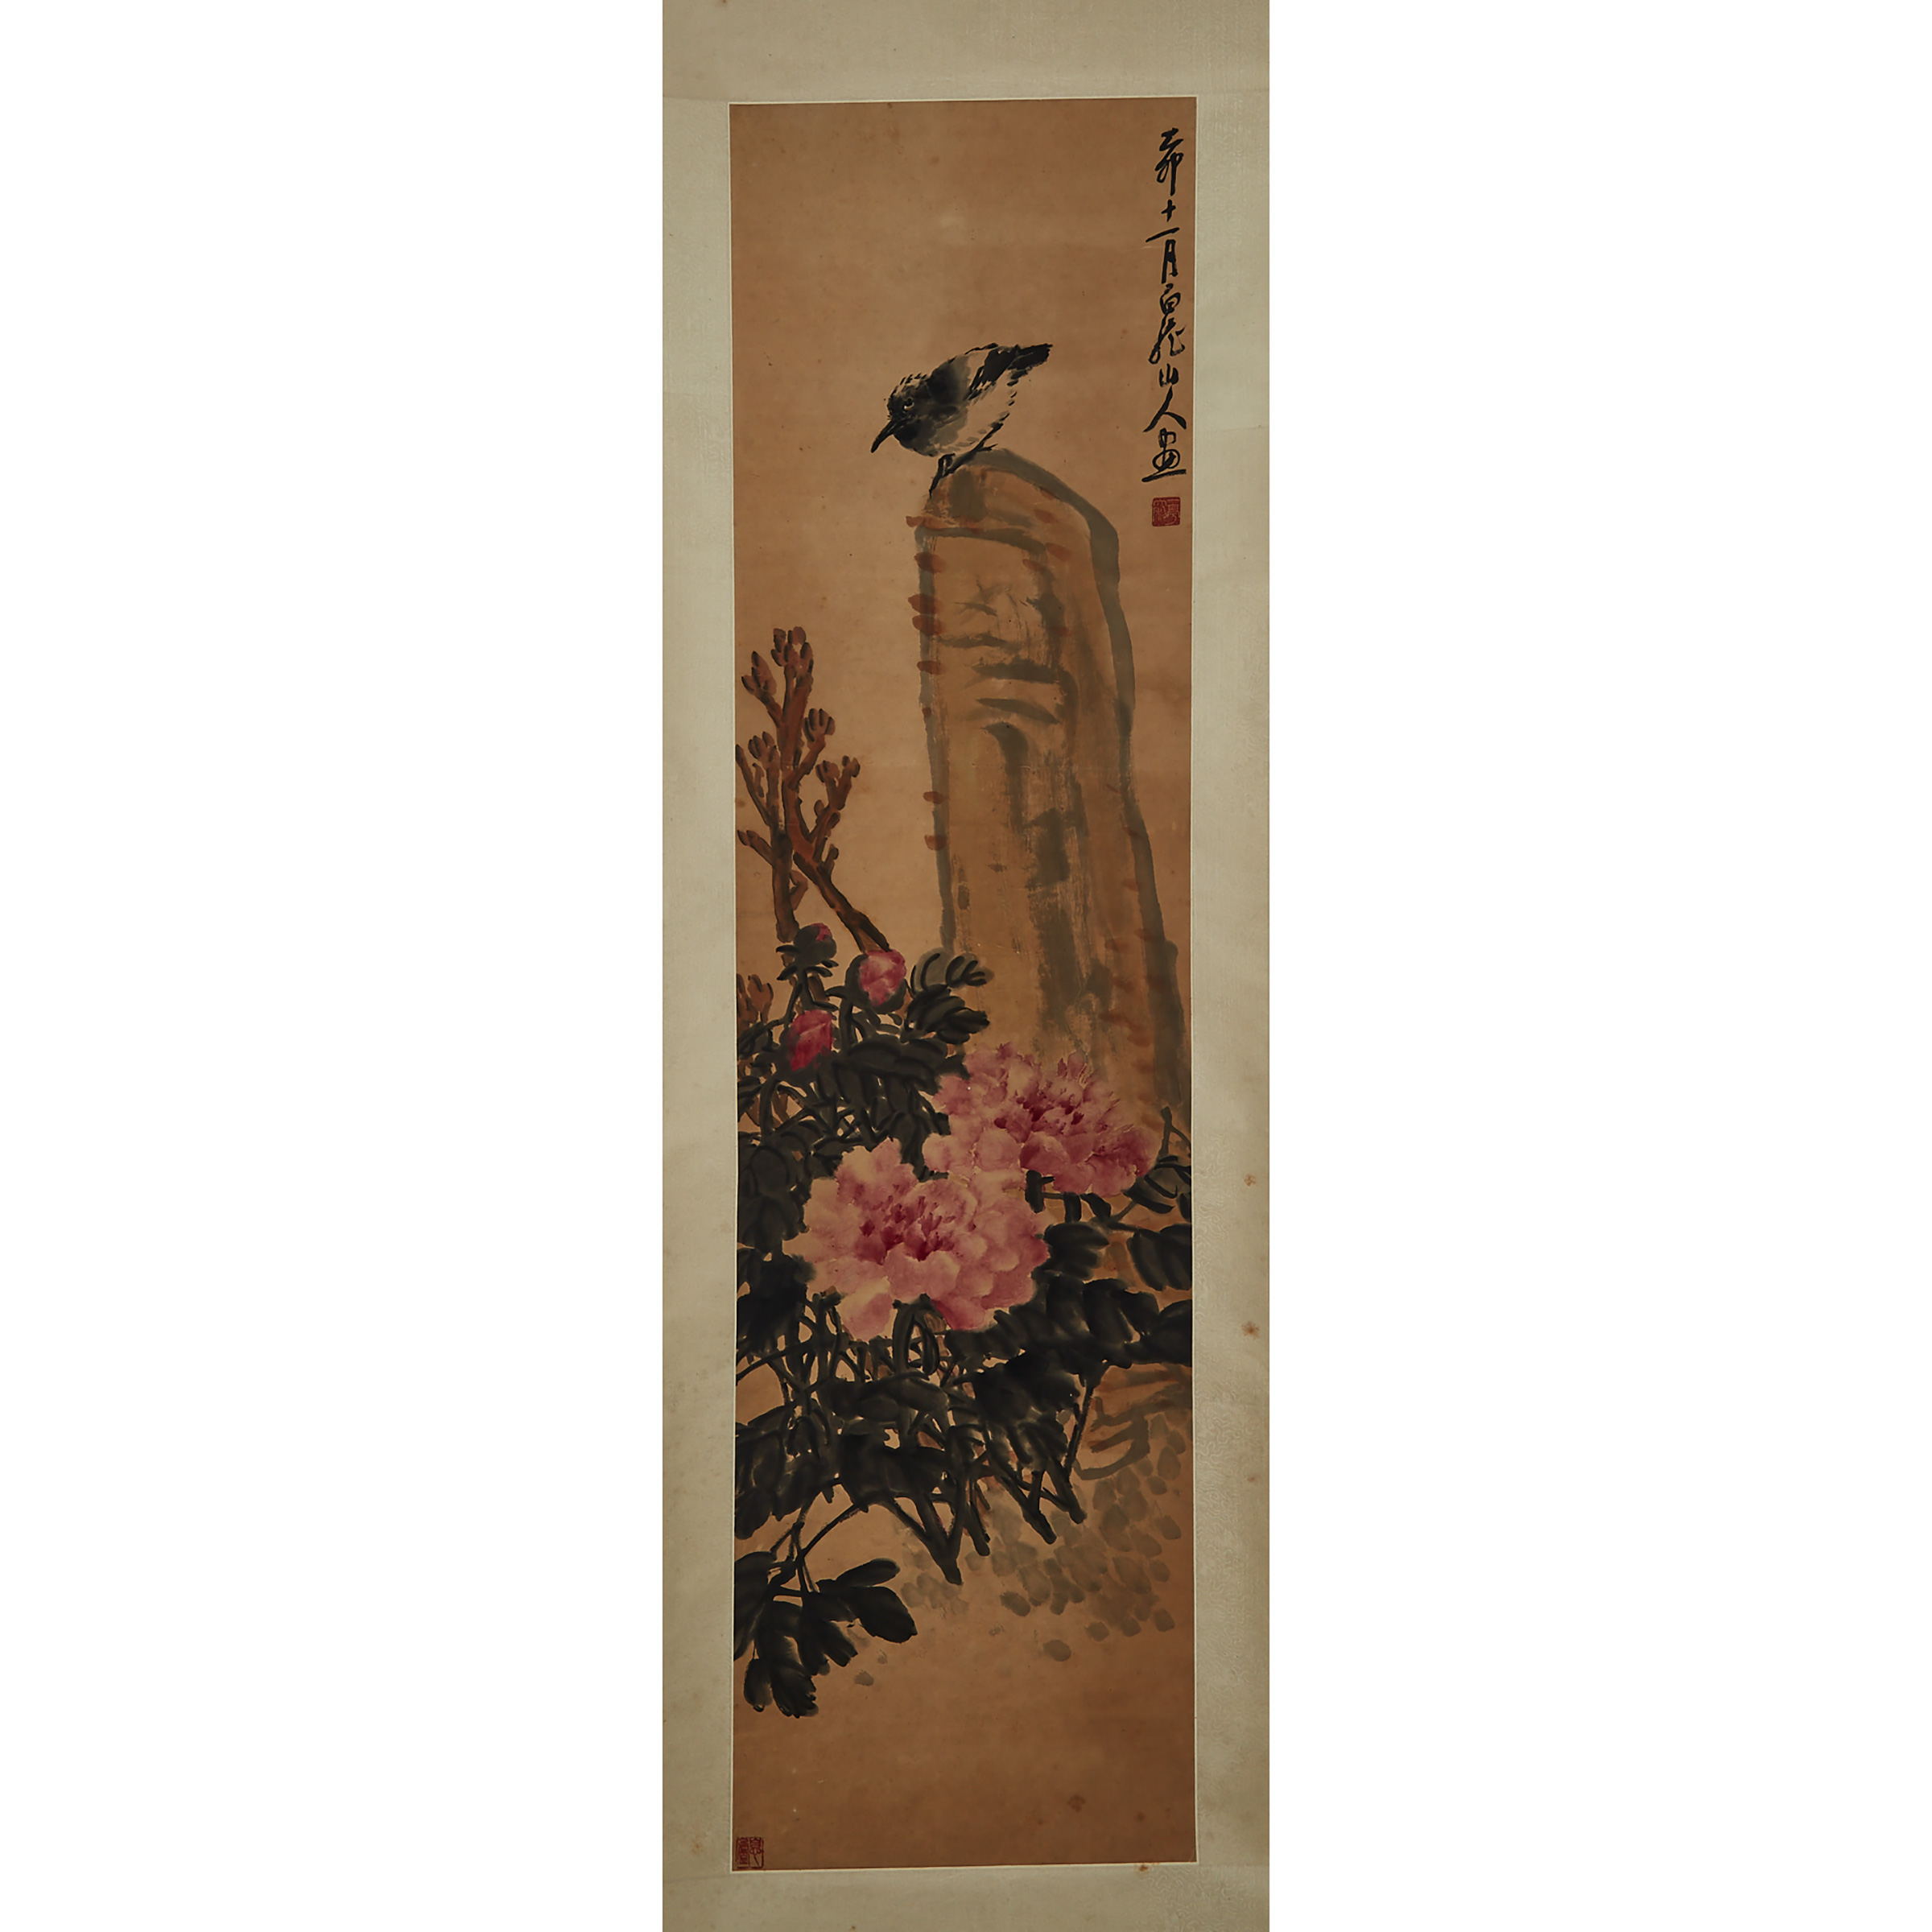 Attributed to Wang Zhen (1867-1938), Bird and Flower, 1915